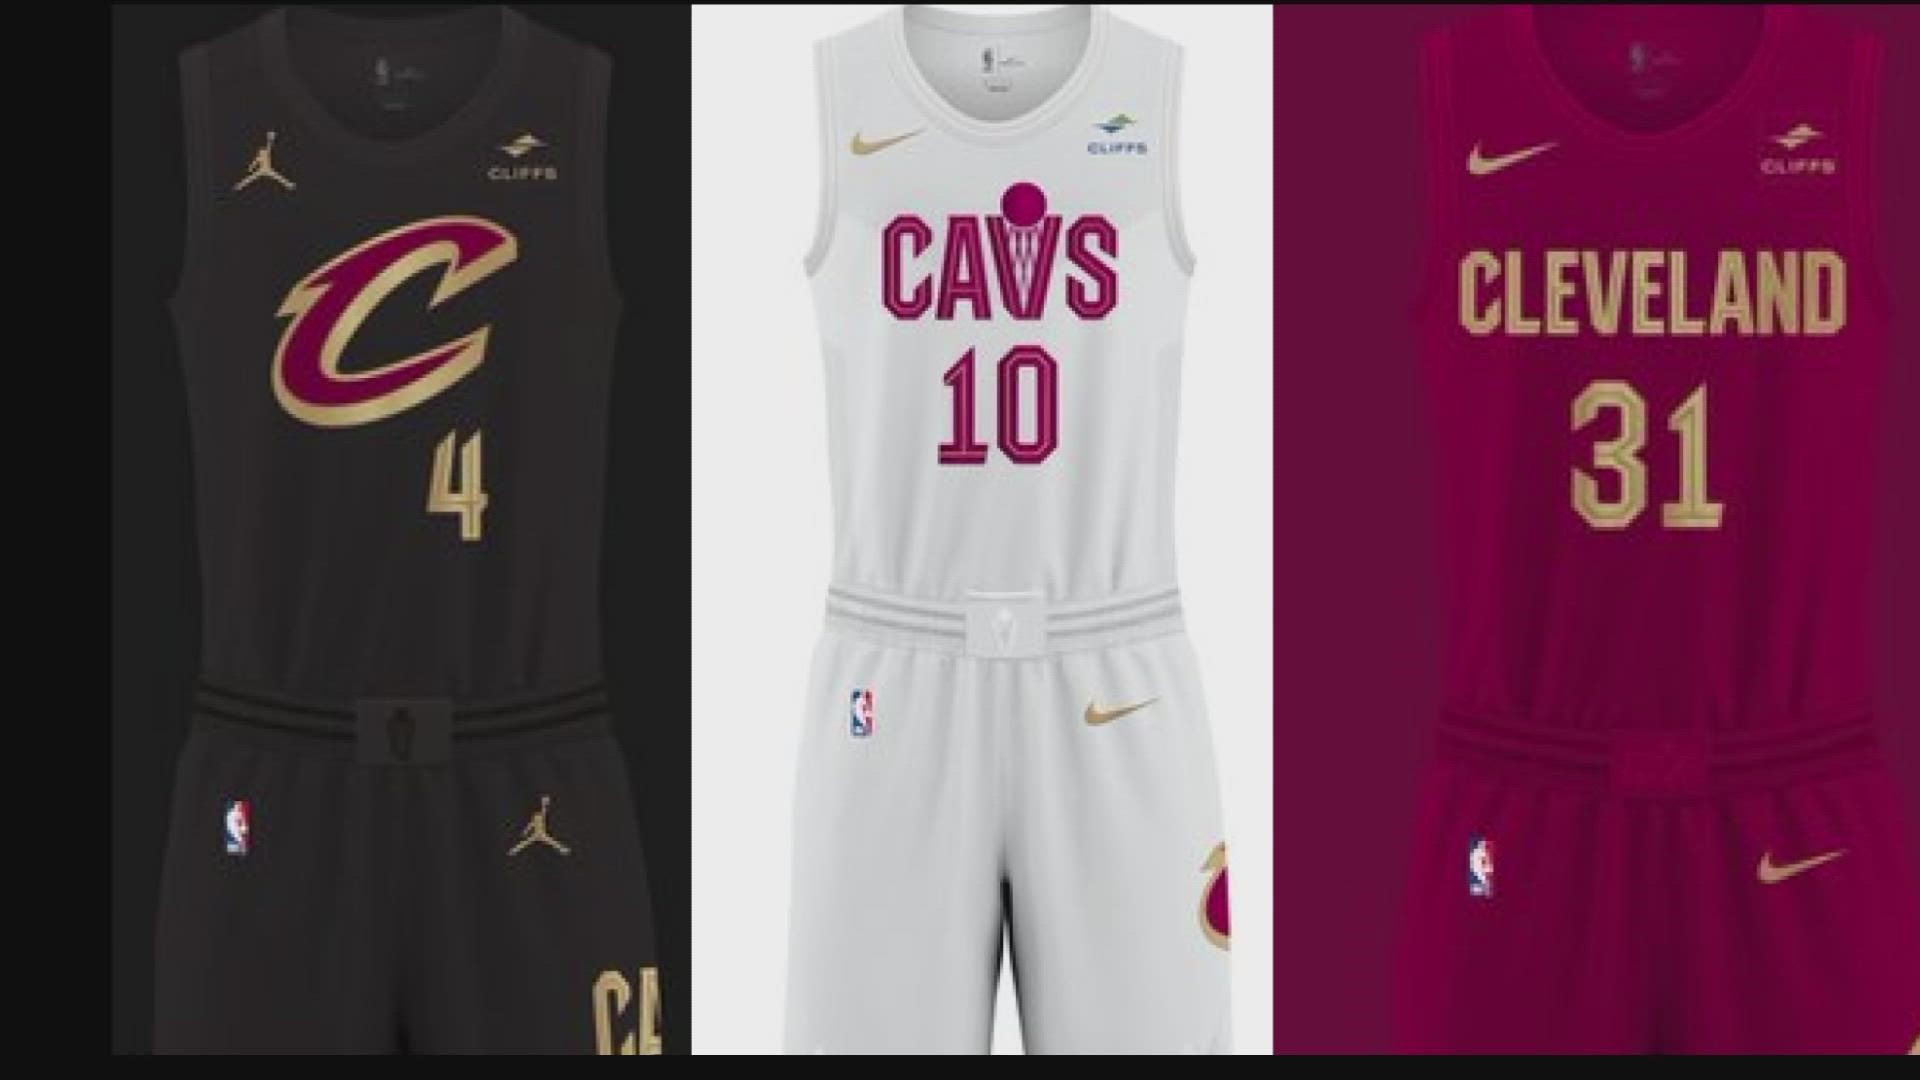 Cleveland Cavaliers finally unveil their new uniforms for 2022-23